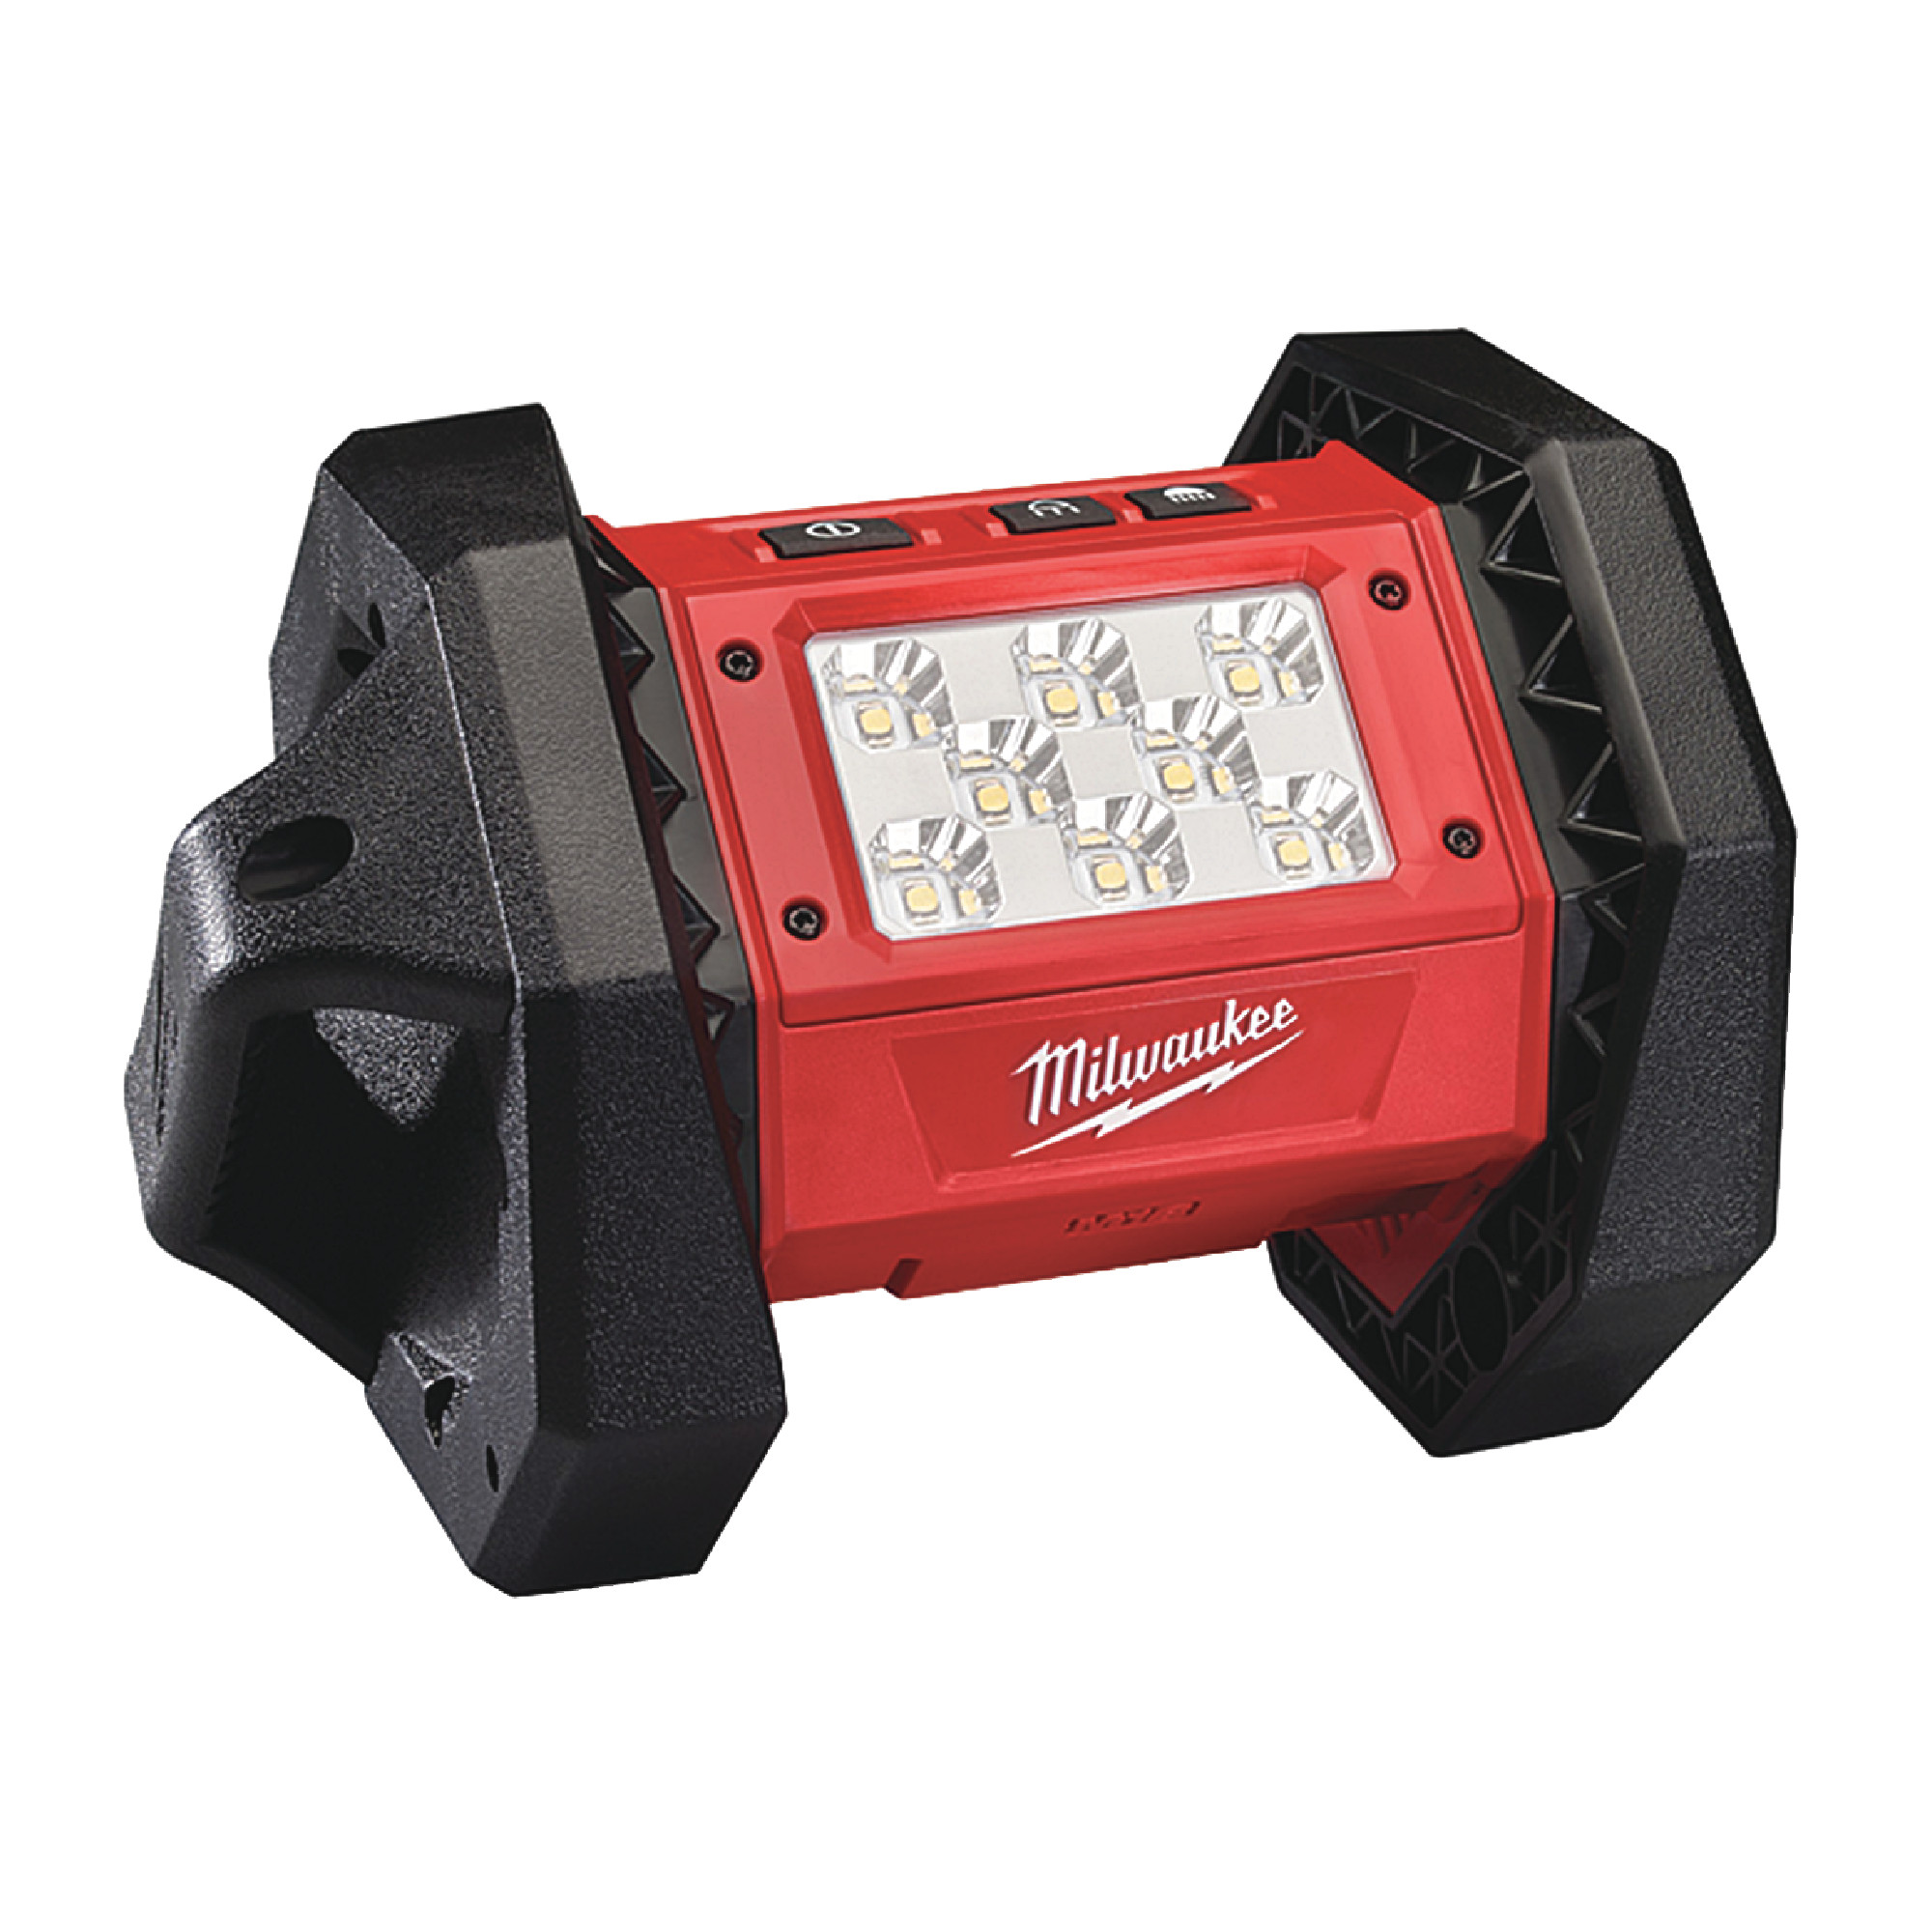 MILWAUKEE M18 ROVER LED Flood Light (Tool-Only) - Model : 2361-20  Volts:  18W